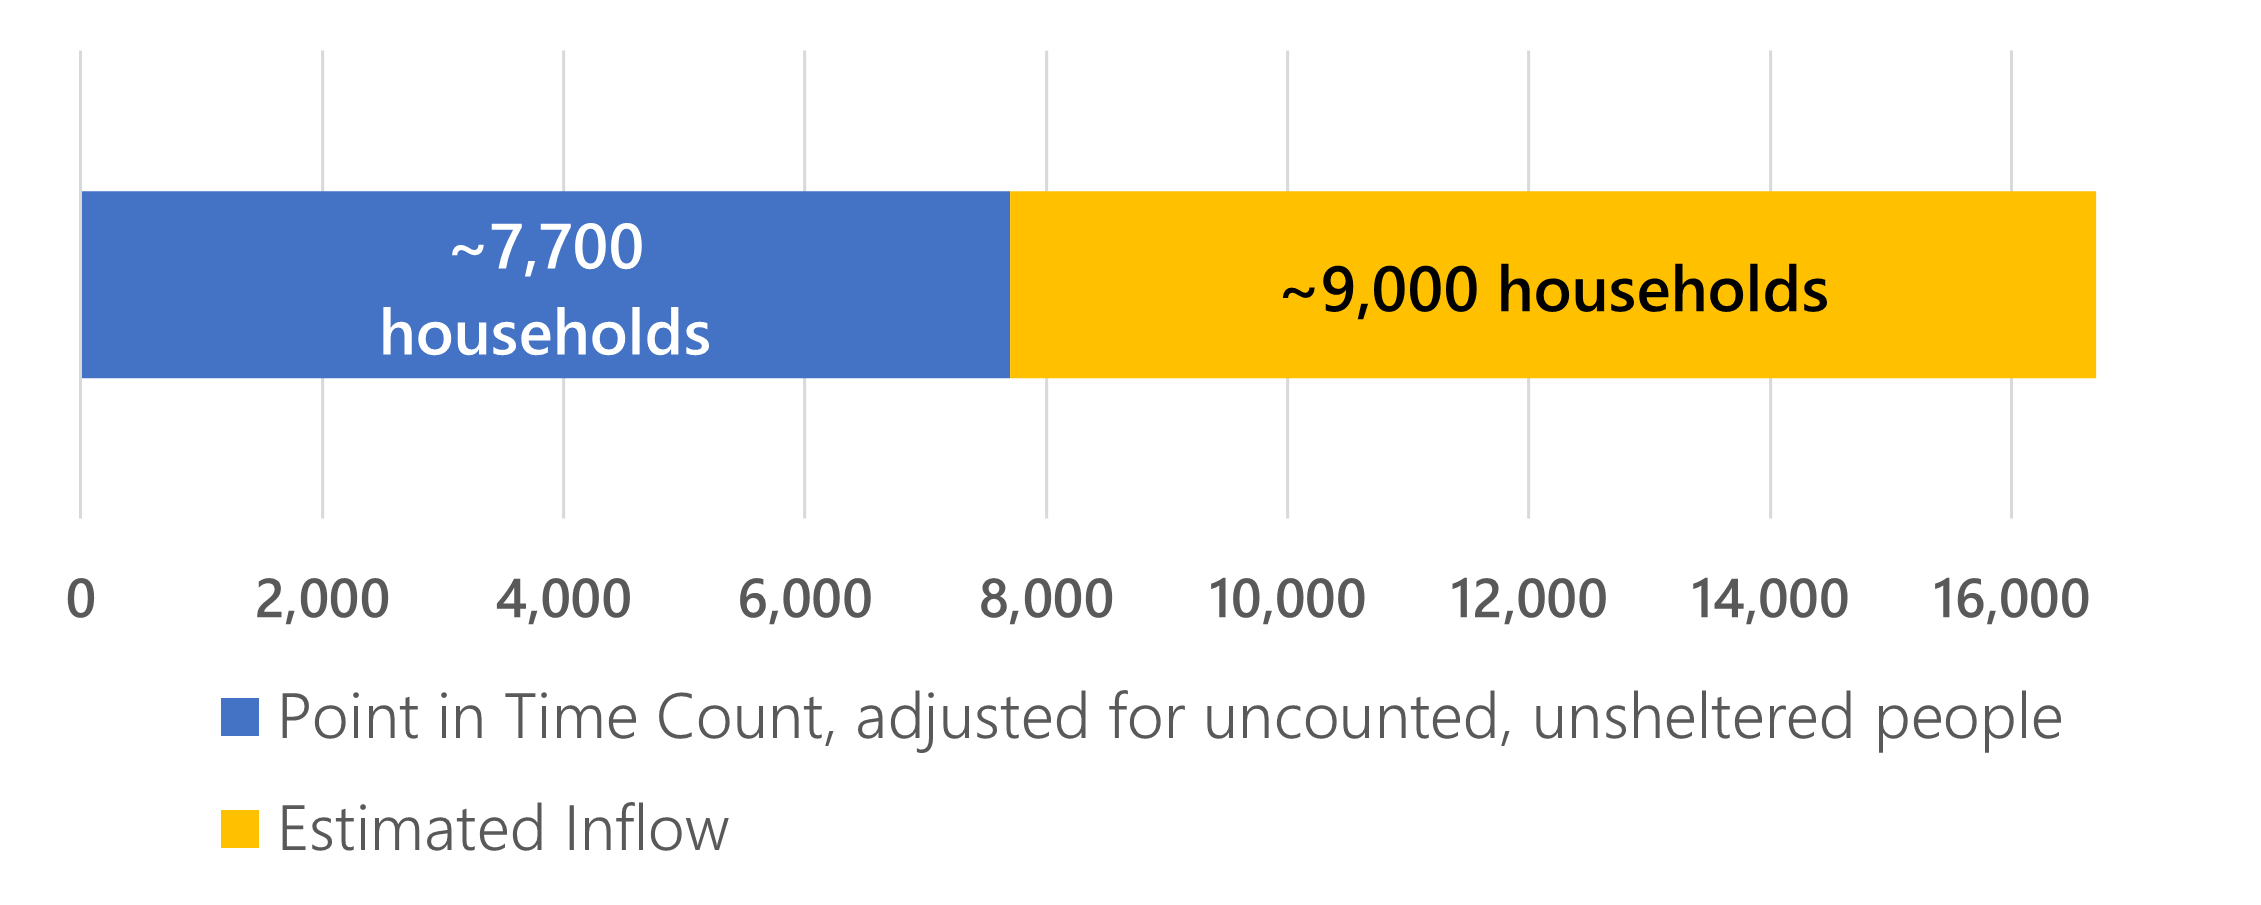 horizontal bar chart showing point in time and estimated annual inflow into homelessness.